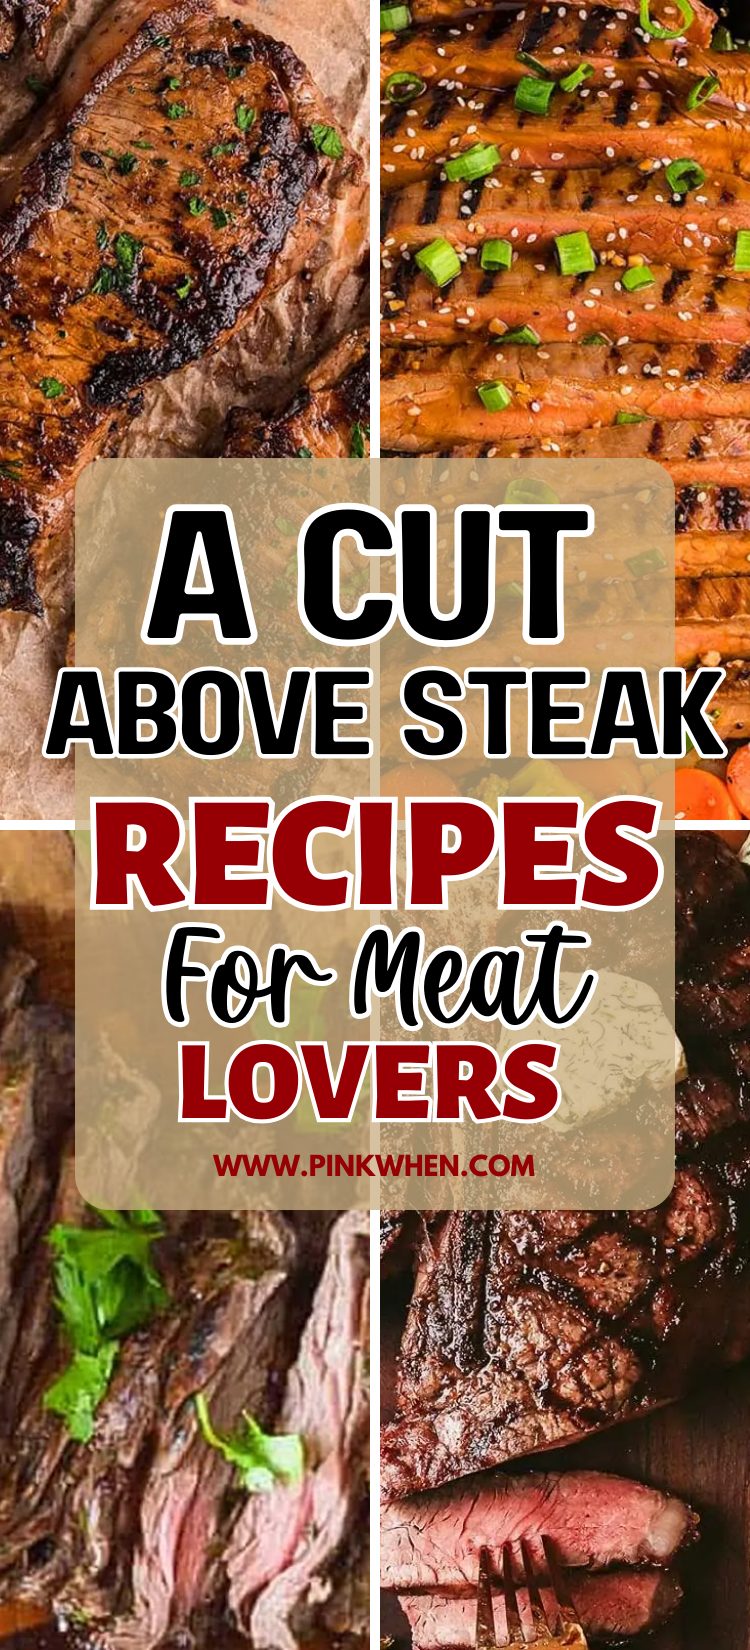 A Cut Above: Steak Recipes for Meat Lovers